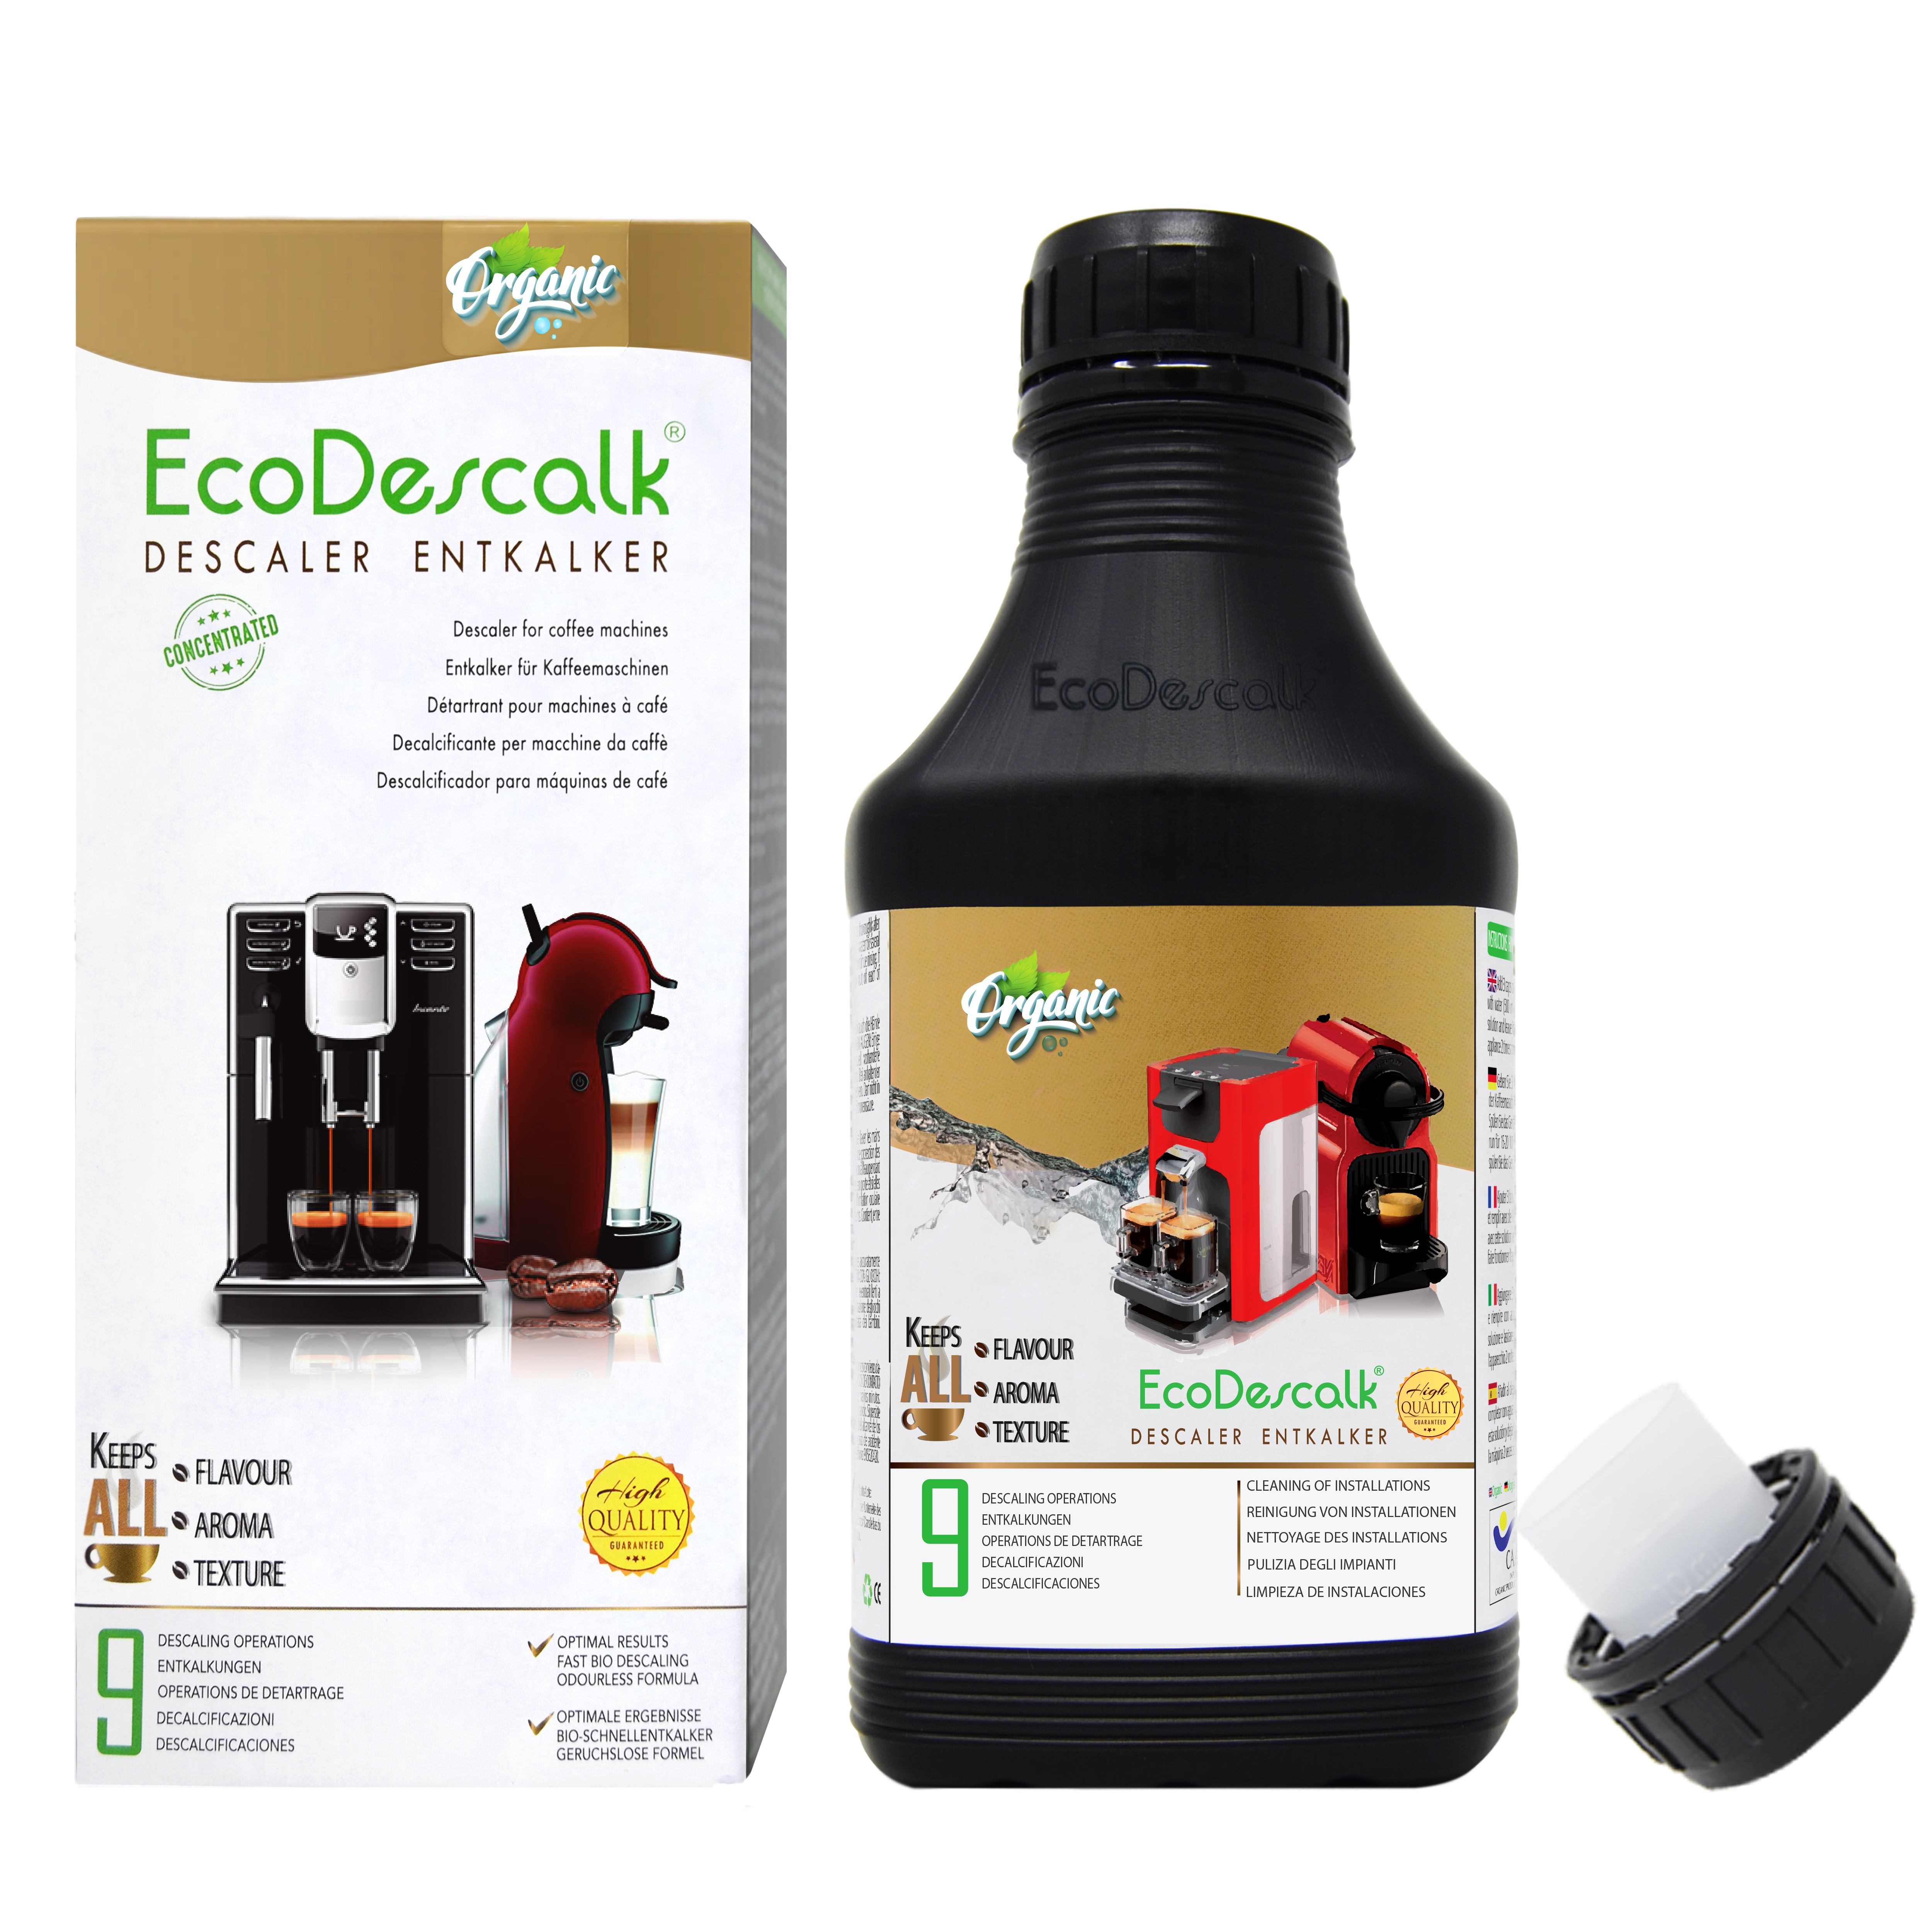 DeLonghi Cleaner for Coffee Machines Nespresso EcoDescalk Organic Powder 2x4 Sachets 100% Natural Descaler 8 Decalcifications.Developed in UK. Tassimo All Brands: Bosch 